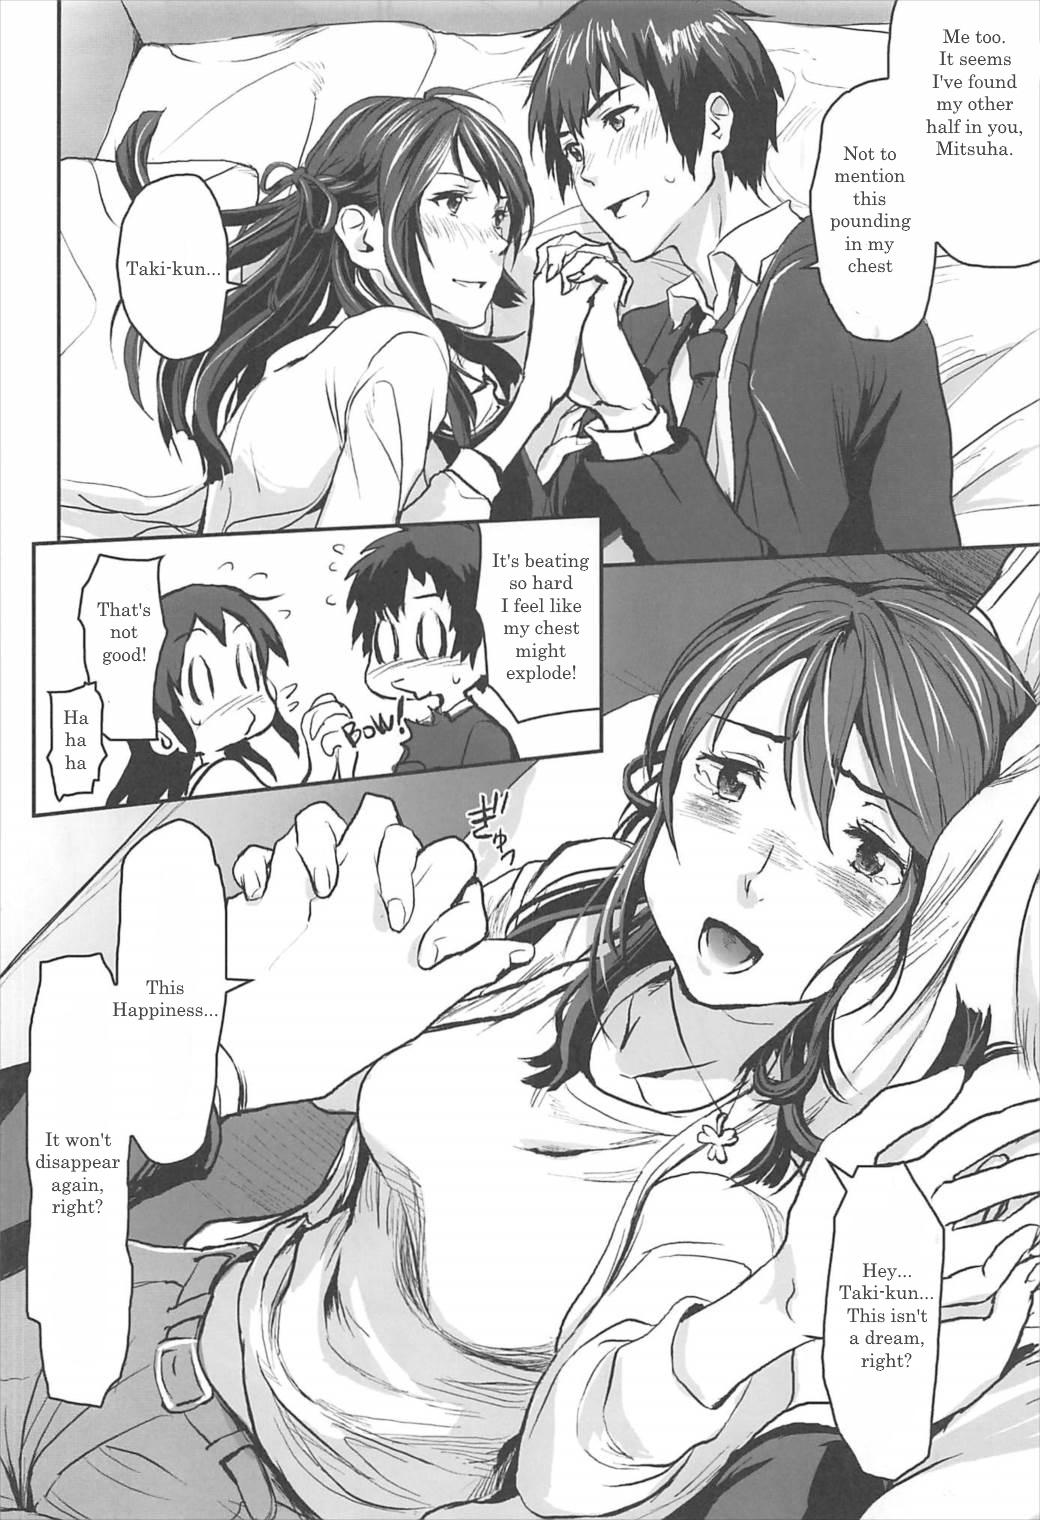 Whipping Your Inside - Kimi no na wa. Sister - Page 11